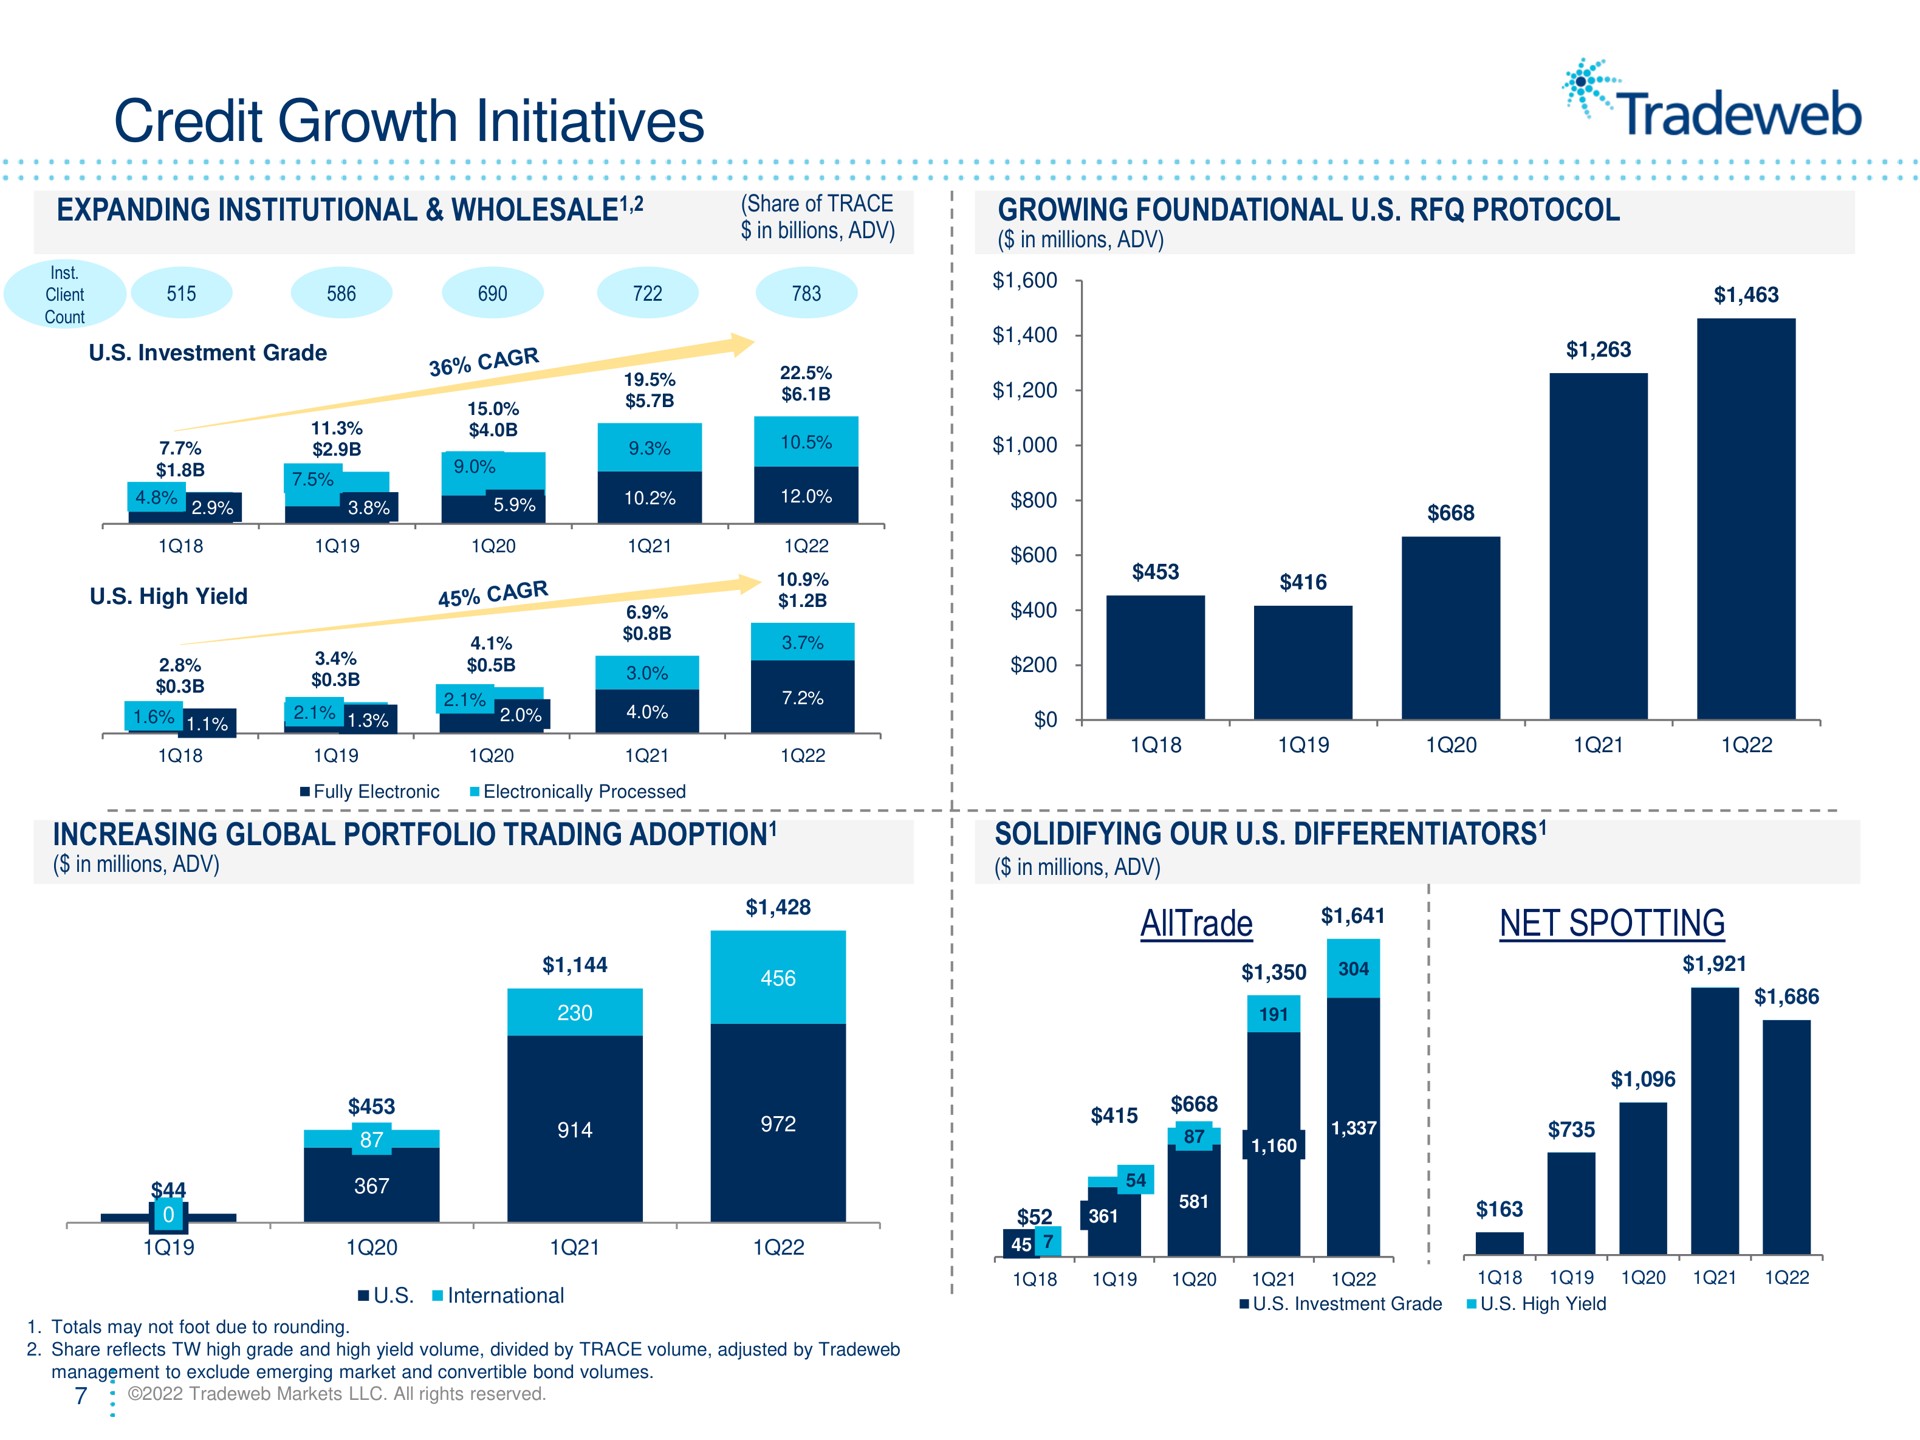 credit growth initiatives expanding institutional wholesale growing foundational protocol increasing global portfolio trading adoption solidifying our differentiators net spotting | Tradeweb